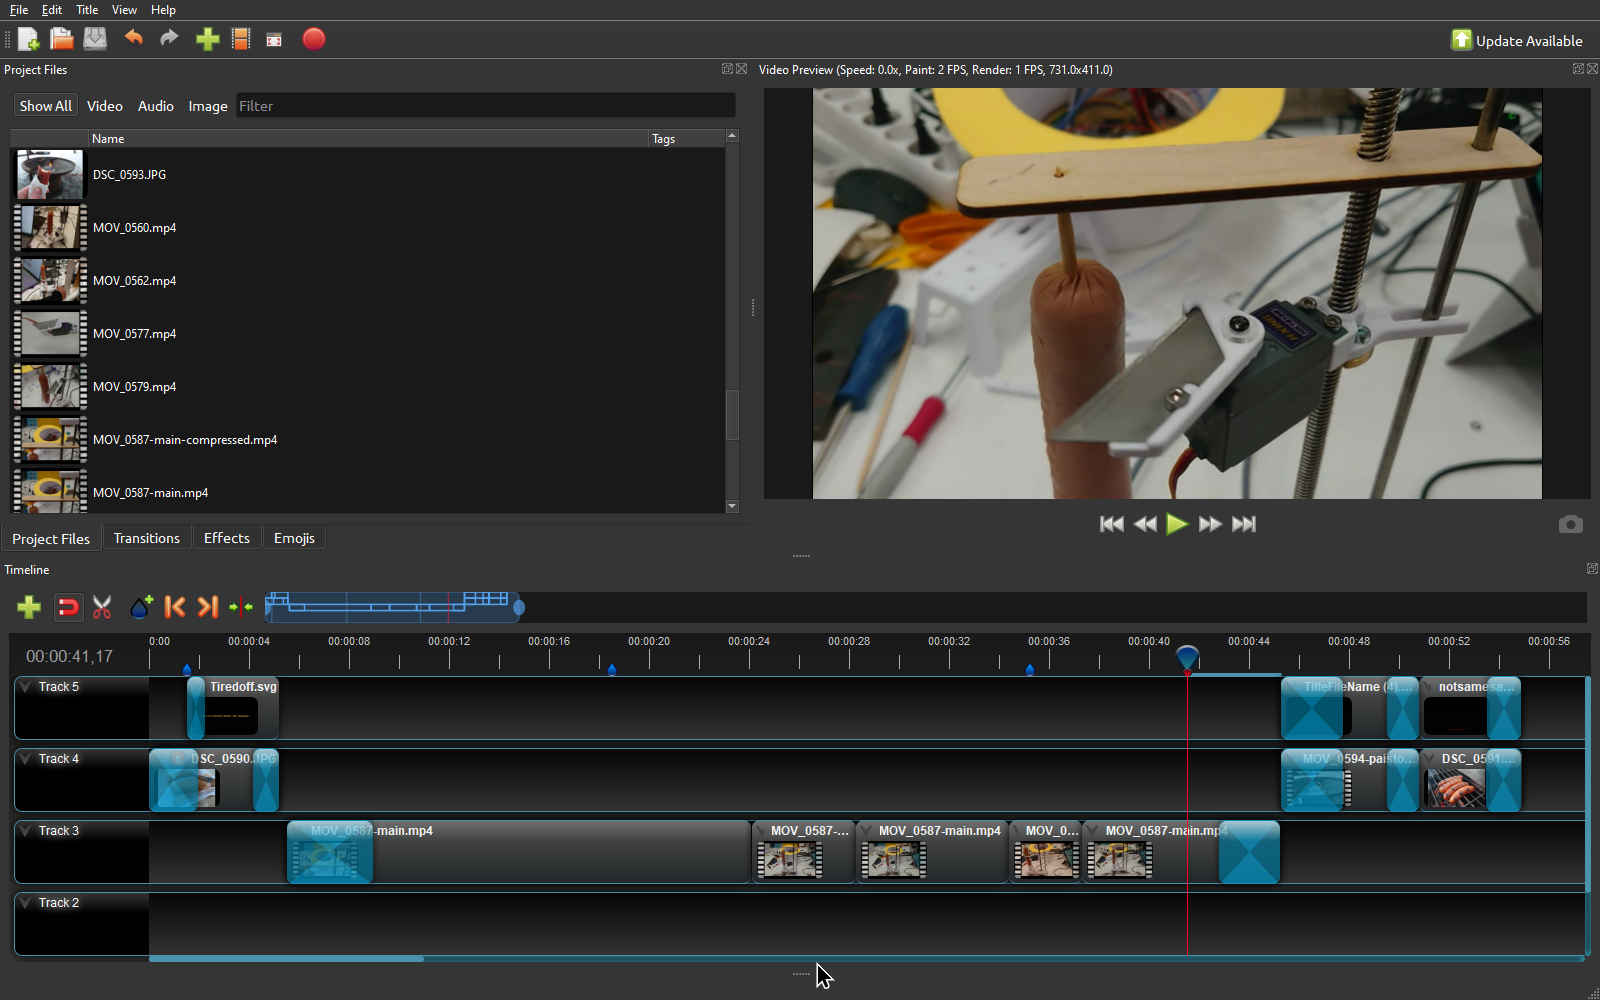 View of the video editor